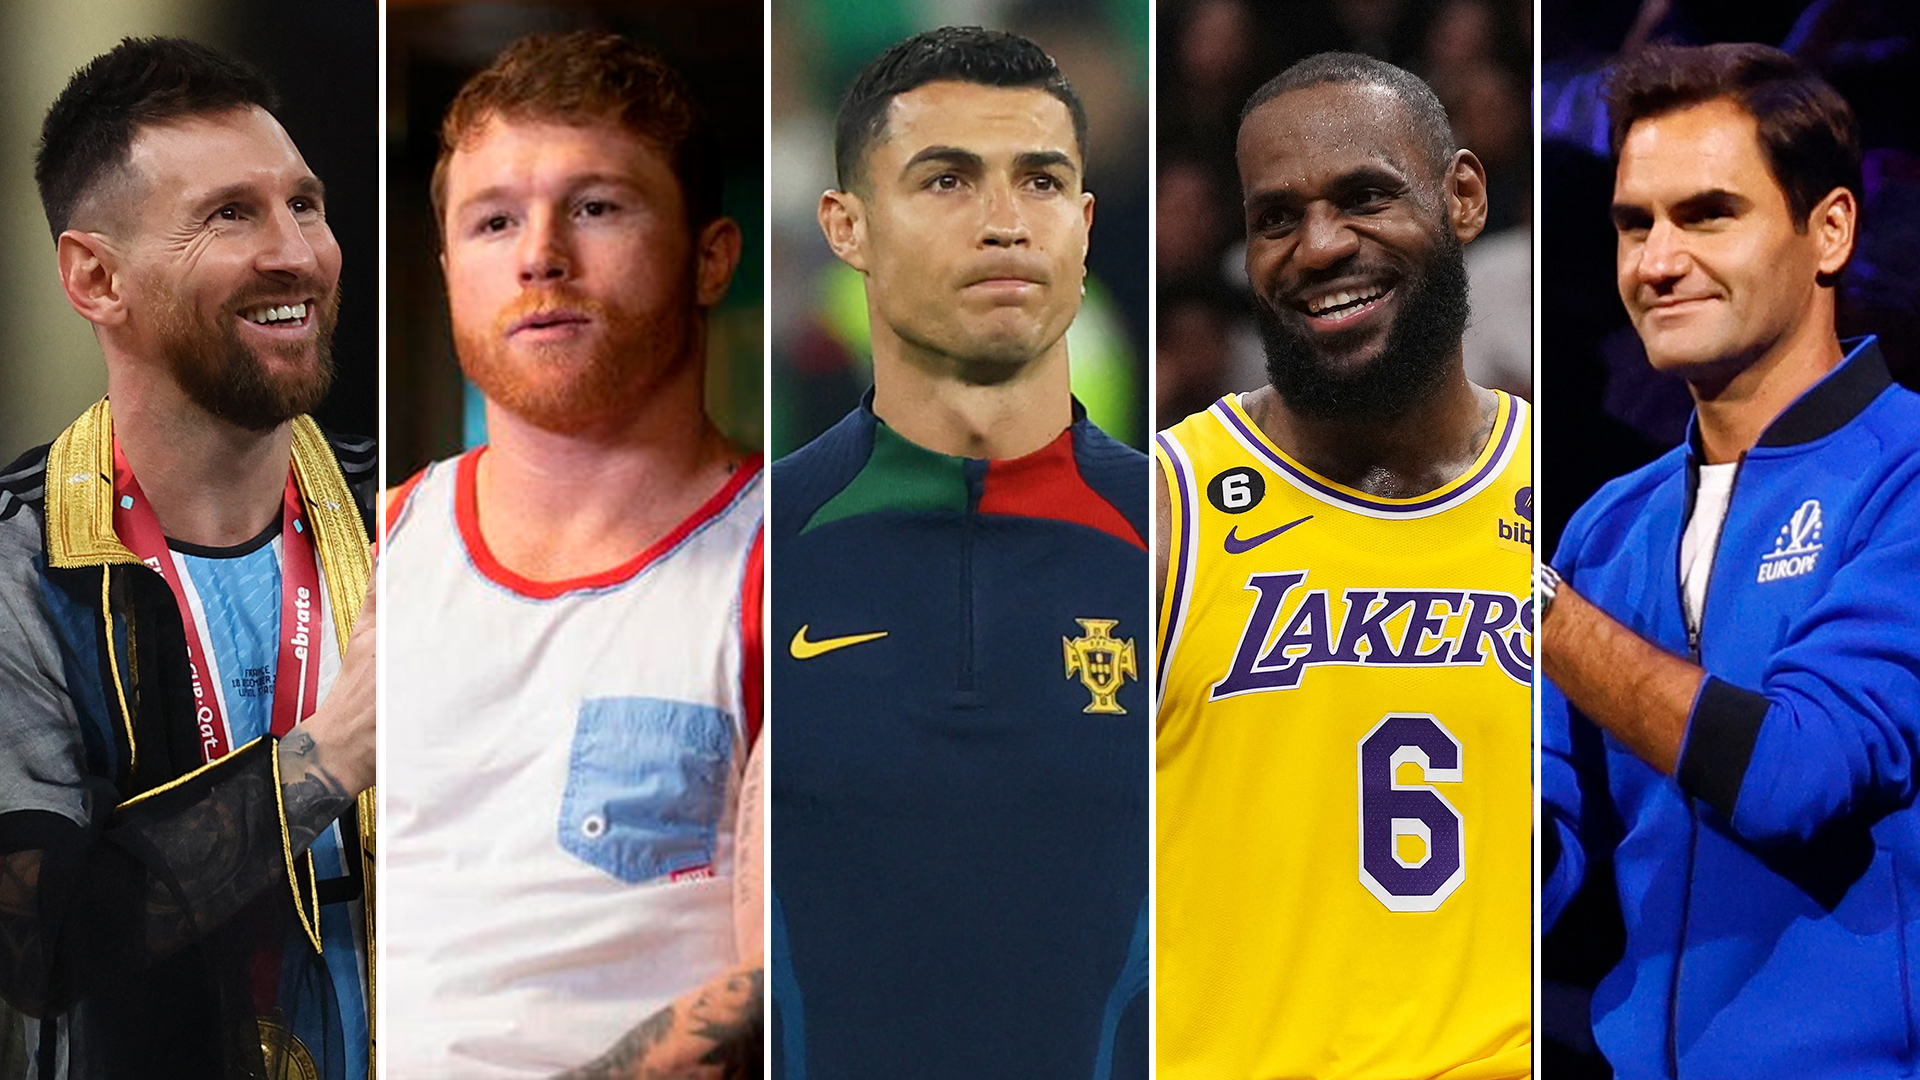 With Messi at the top: the list of the 50 athletes who earned the most money in 2022